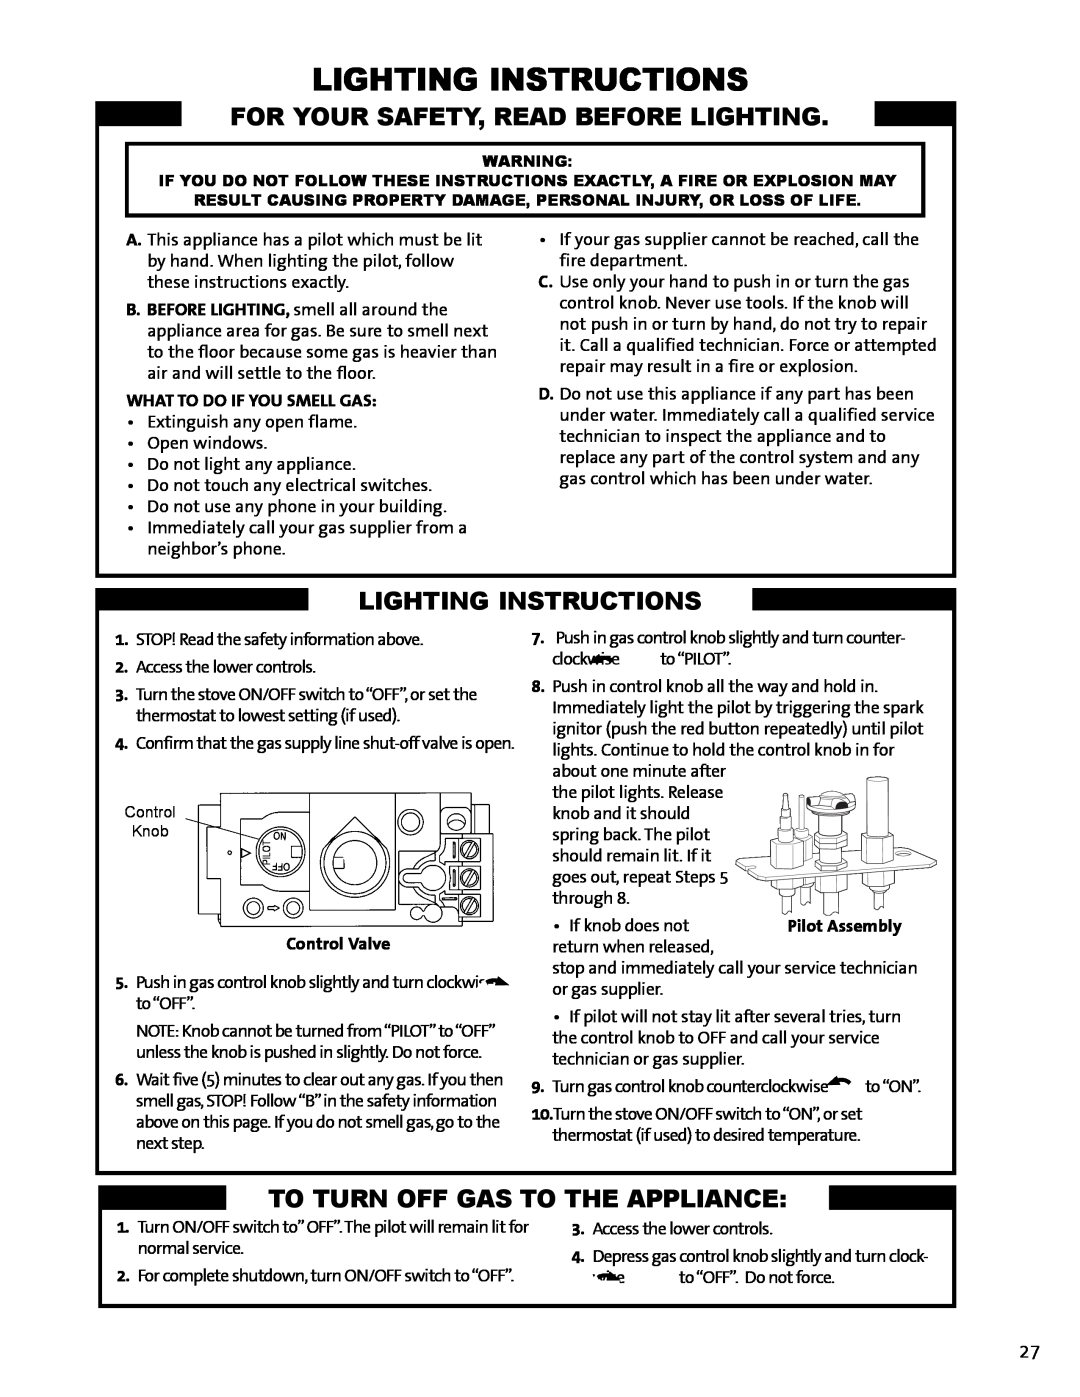 Jotul GF100 DV manual Lighting Instructions, For Your Safety, Read Before Lighting, To Turn Off Gas To The Appliance 